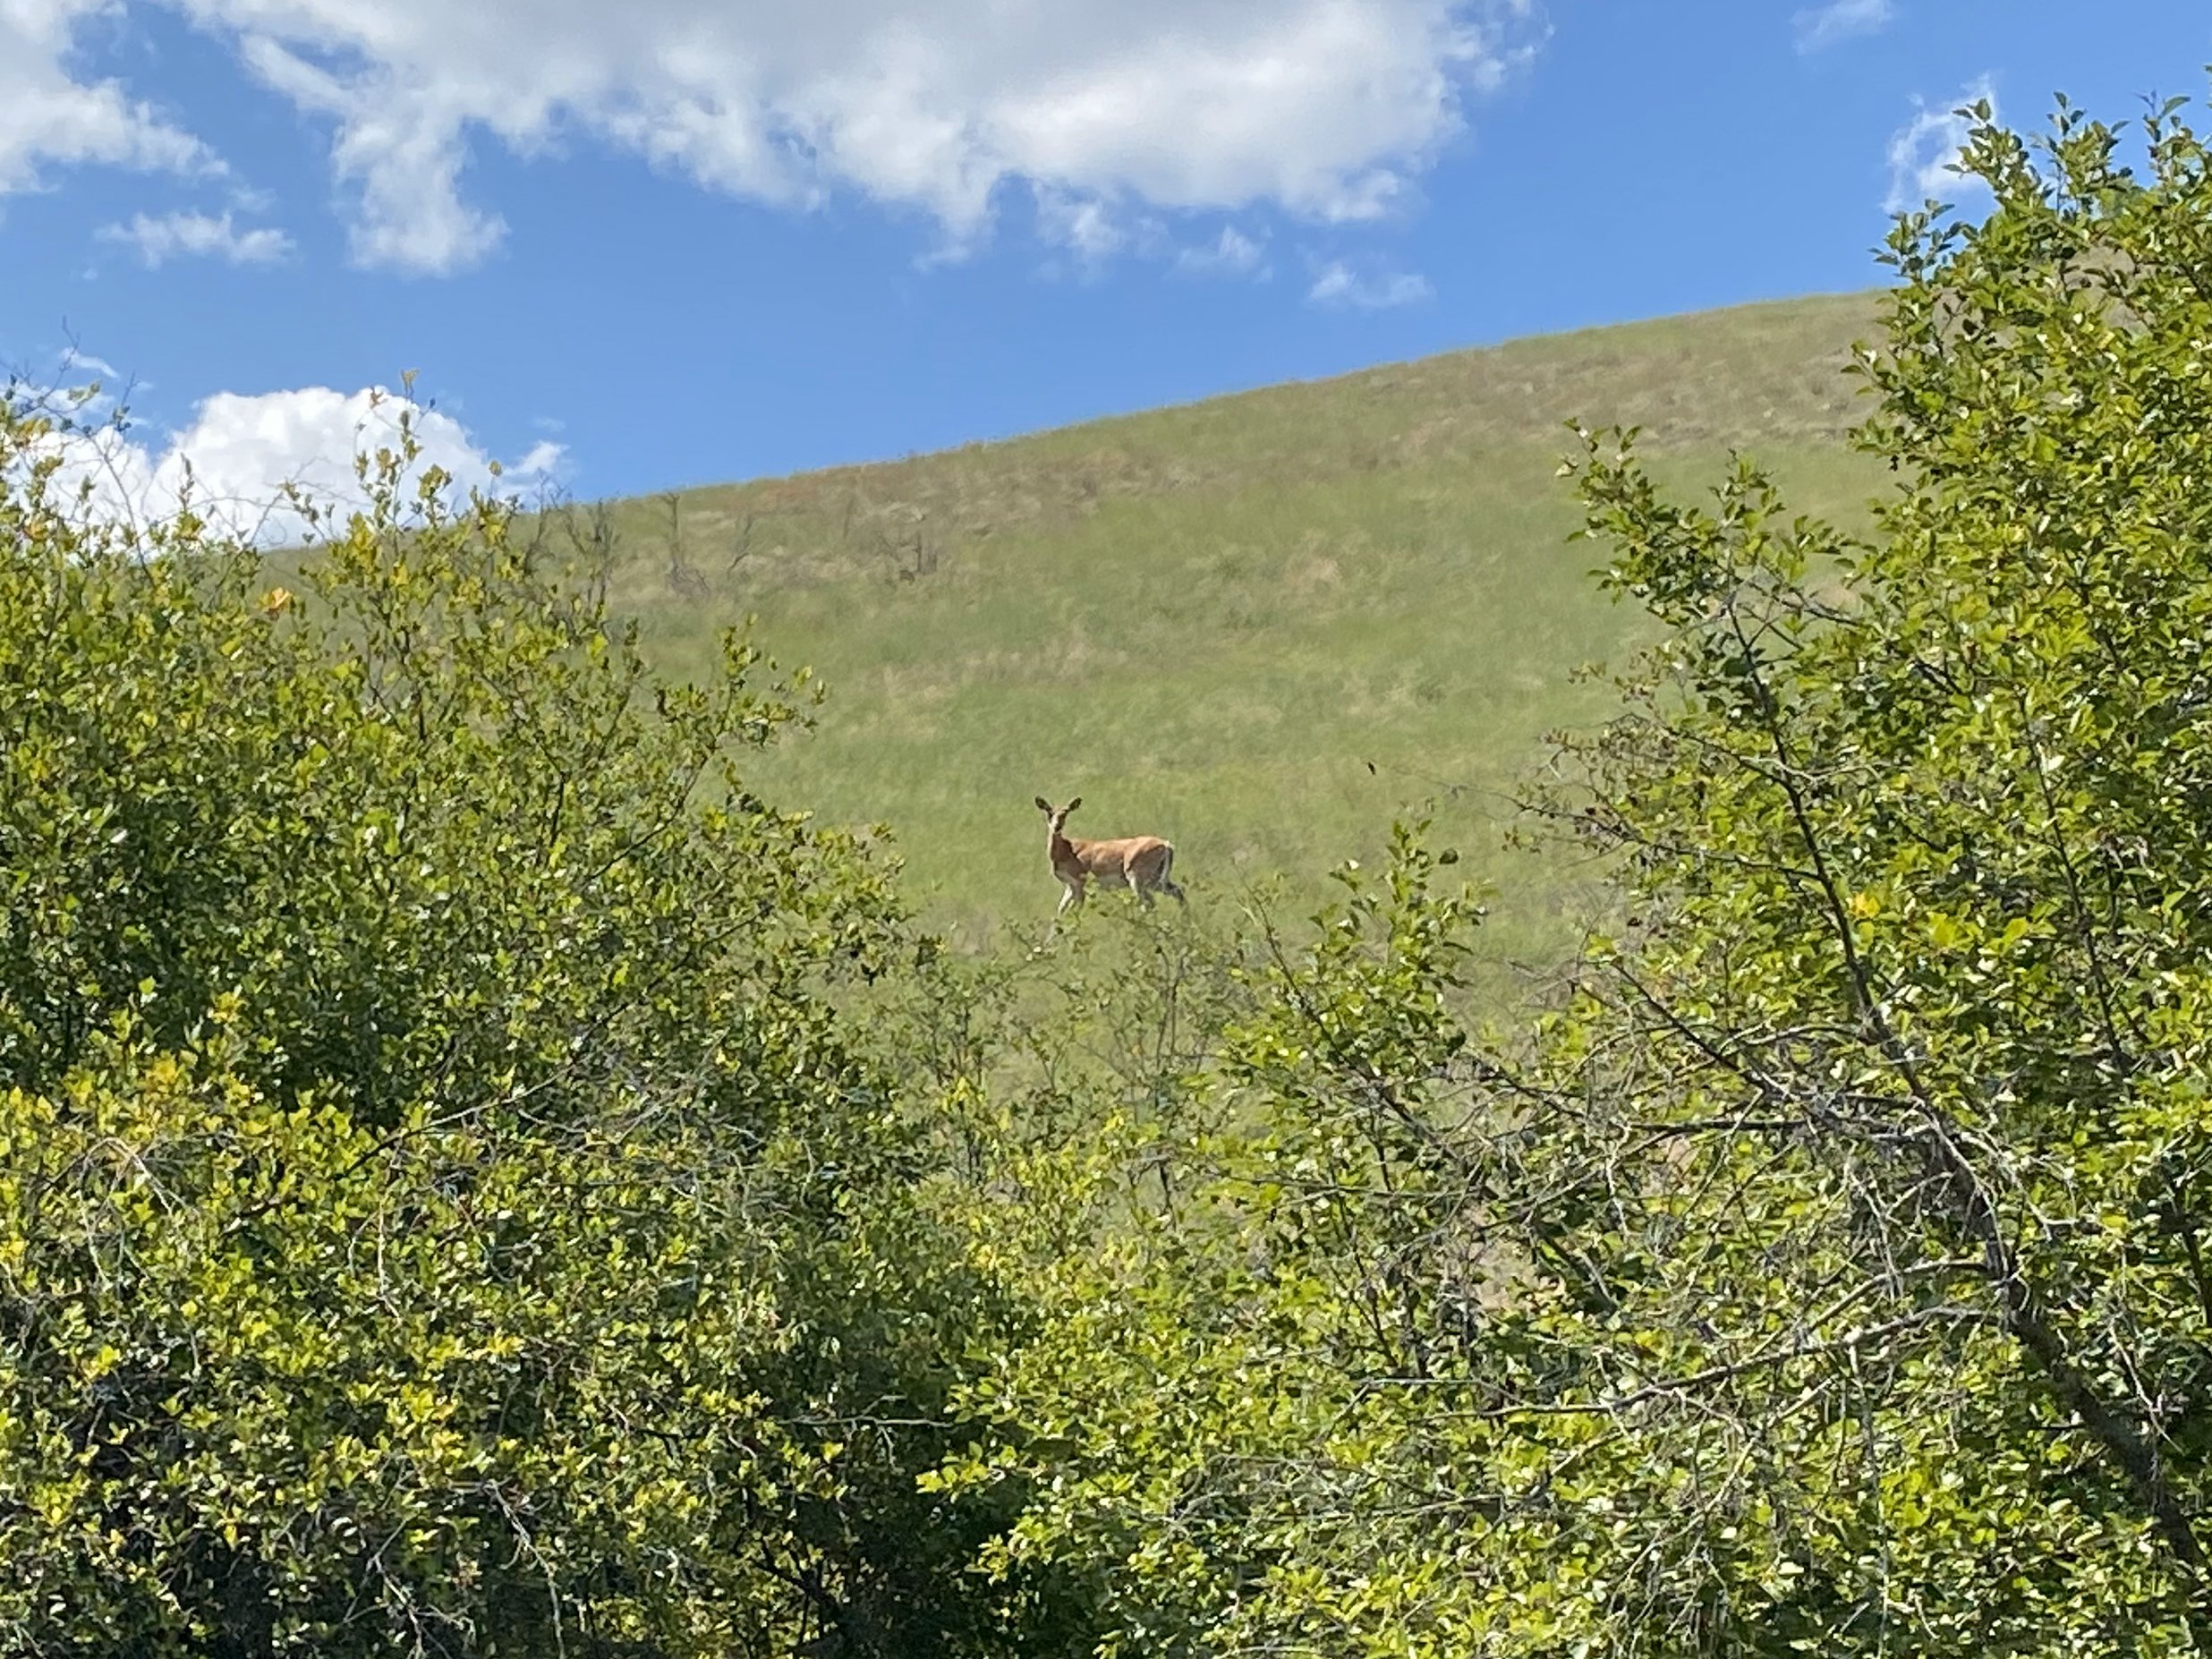 A light tan deer with no antlers looks at the camera while standing in an open grassy hillside with leafy trees in the foreground.